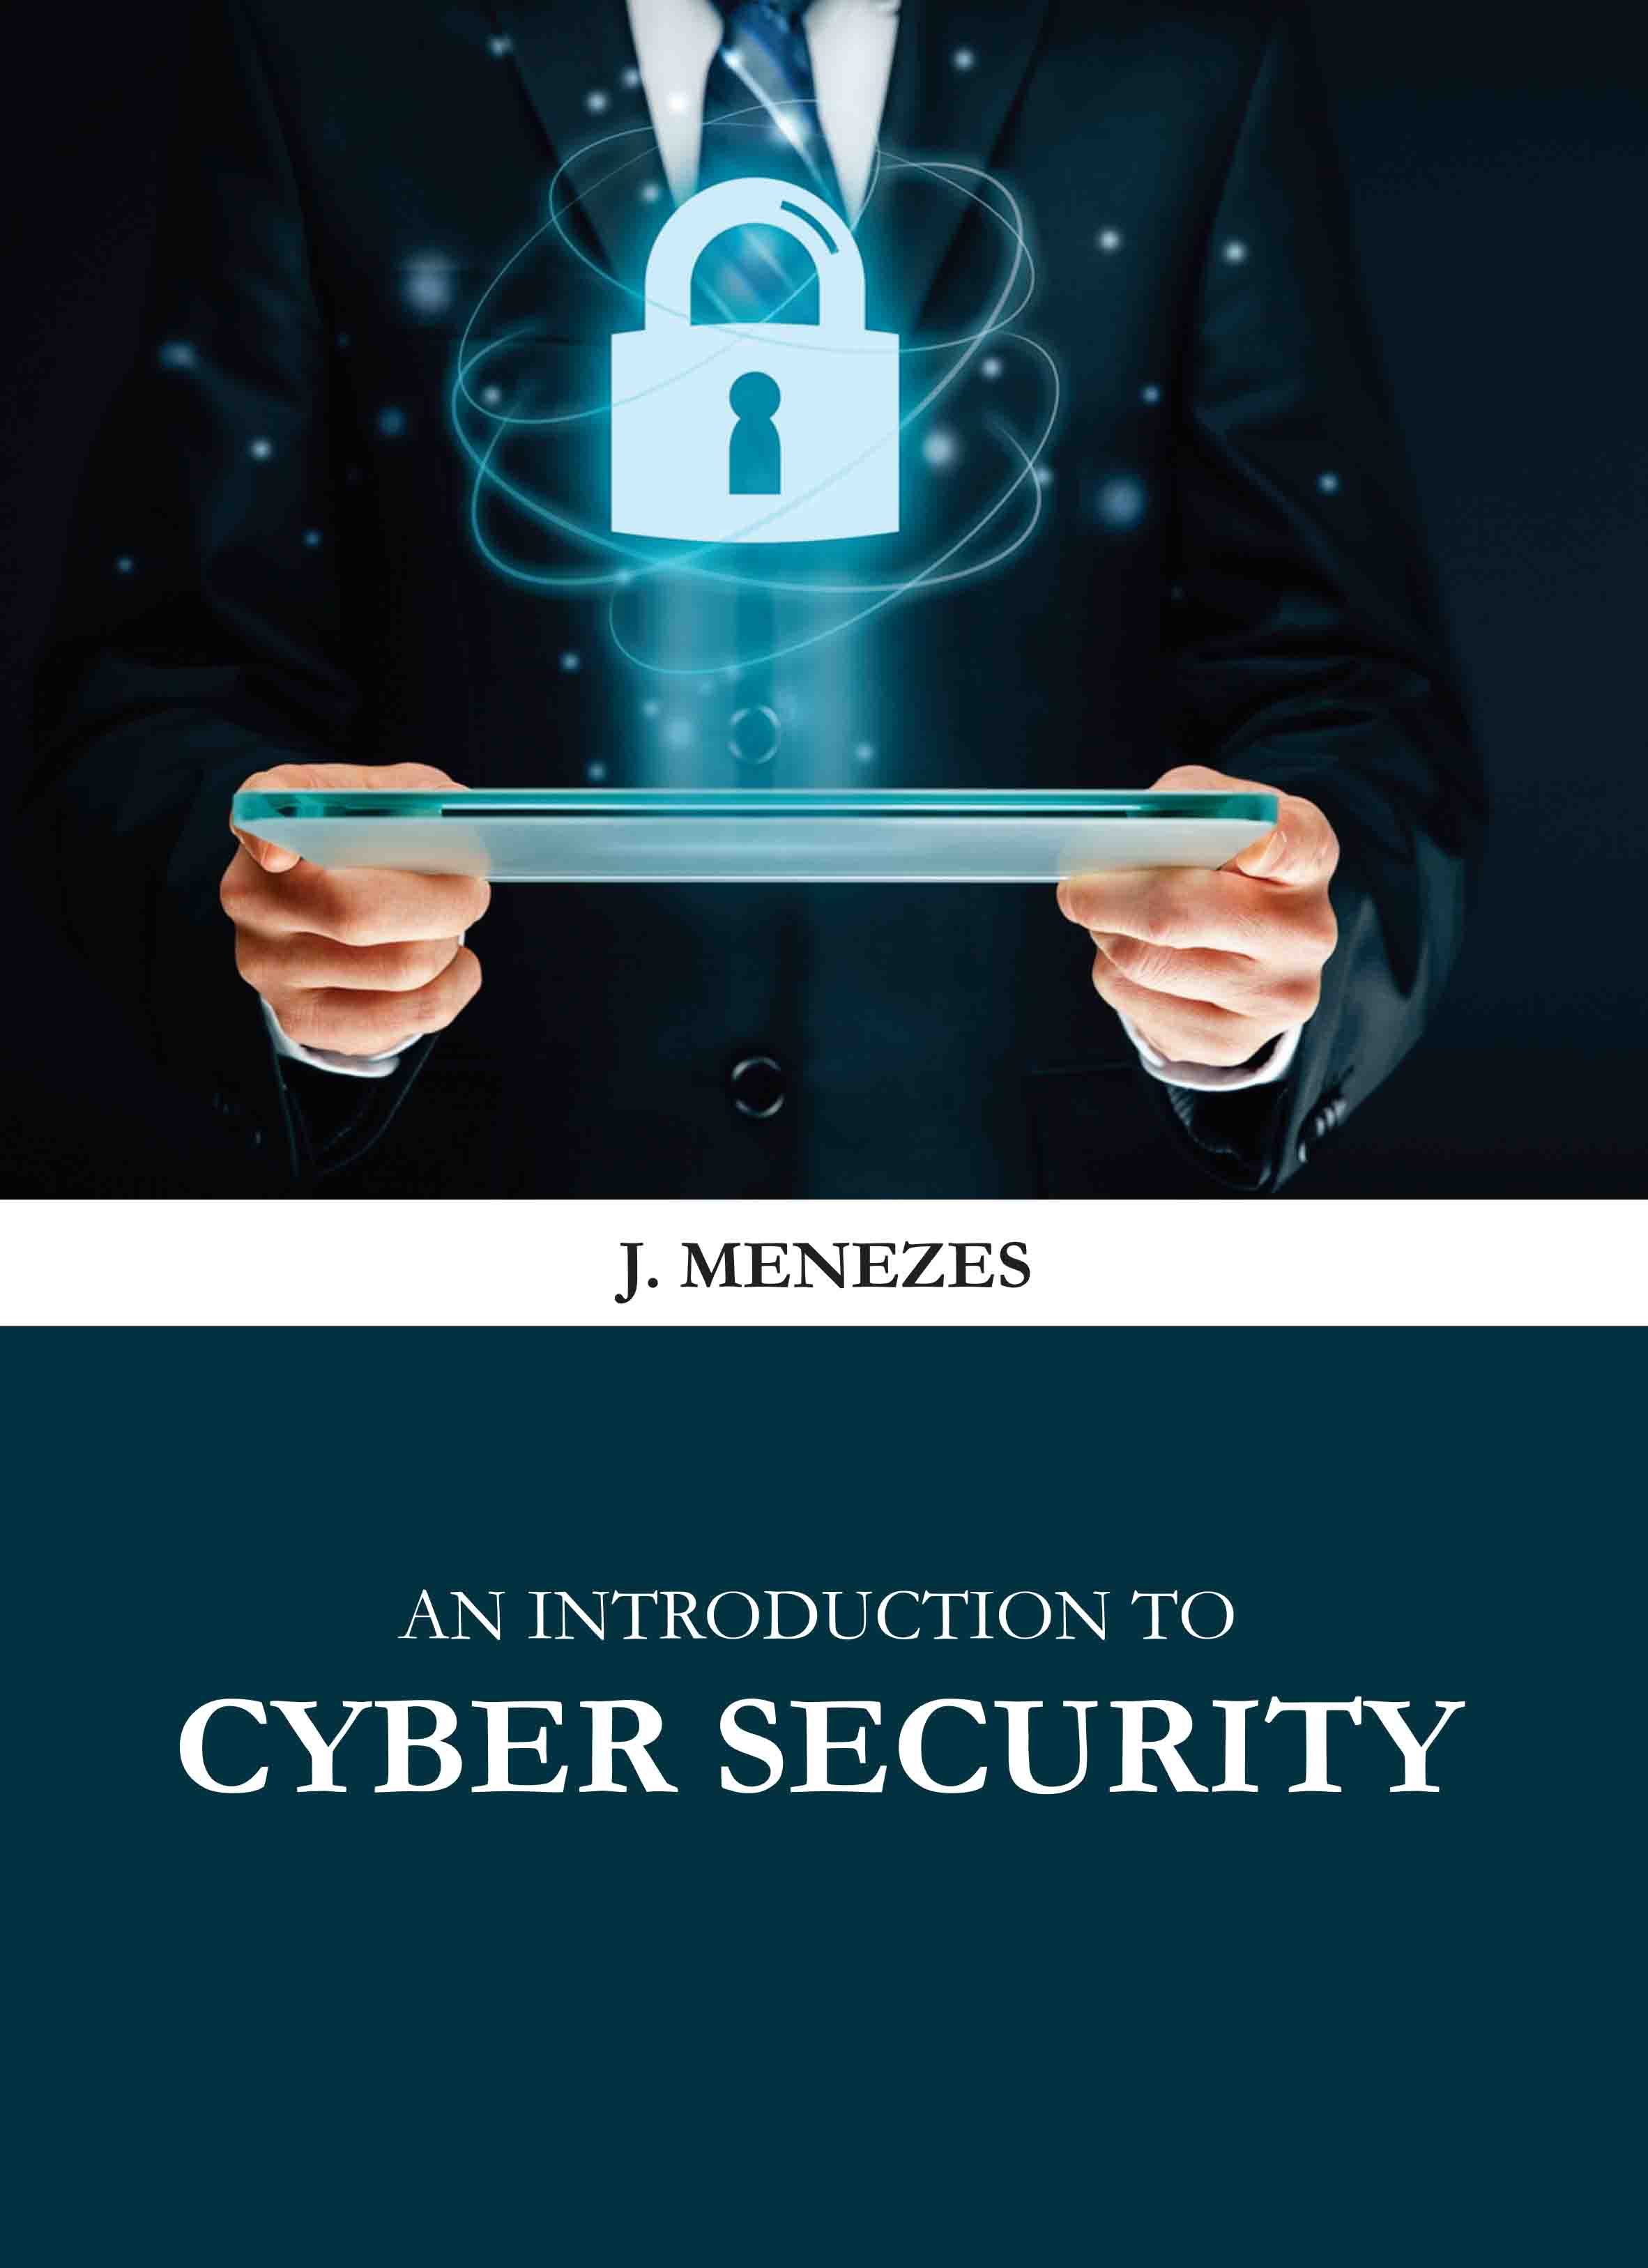 An Introduction to Cyber Security